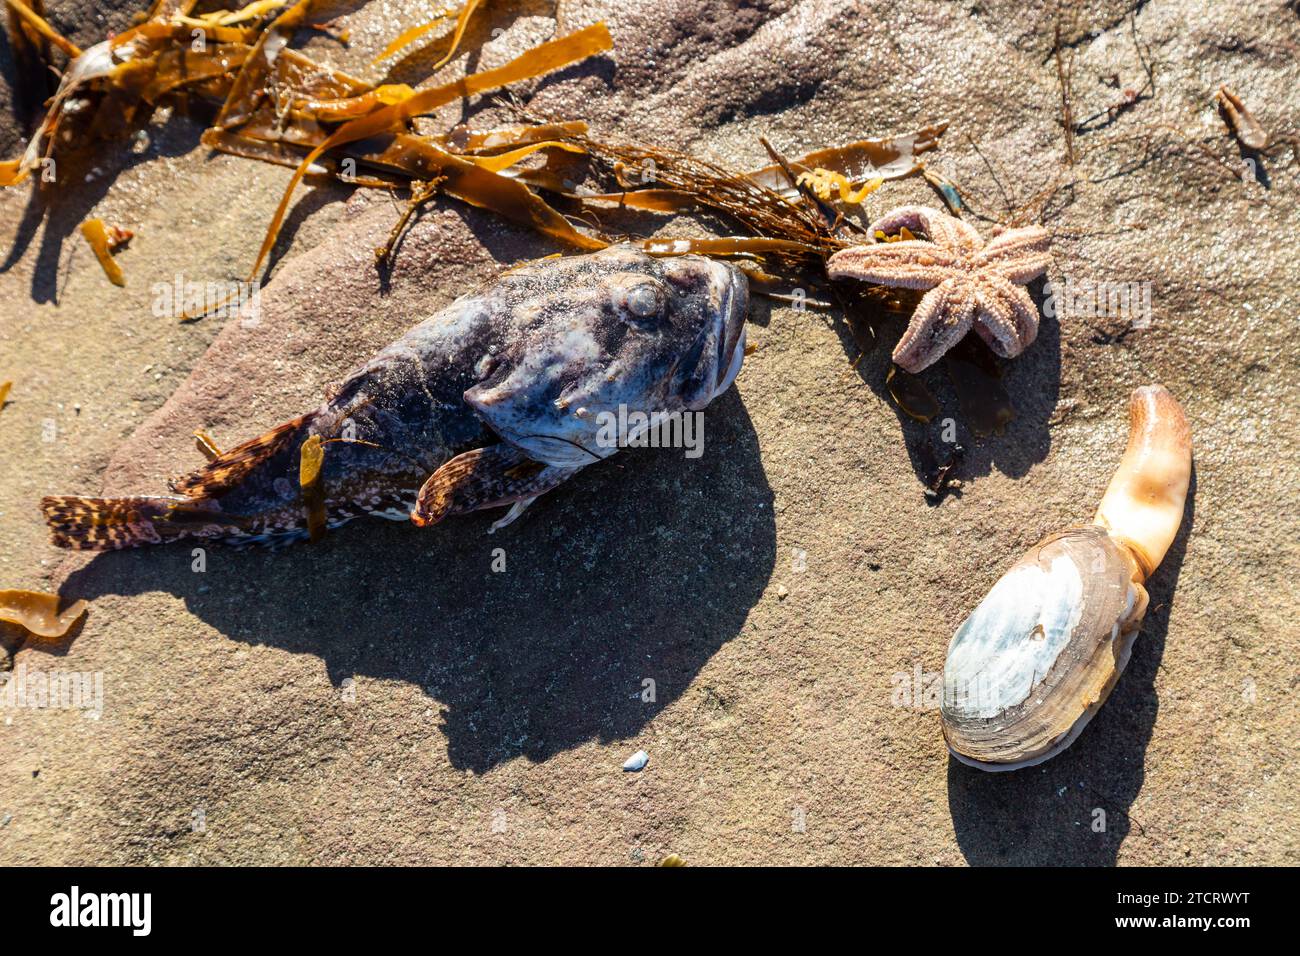 a dead fish and starfish washed up storm babet Stock Photo